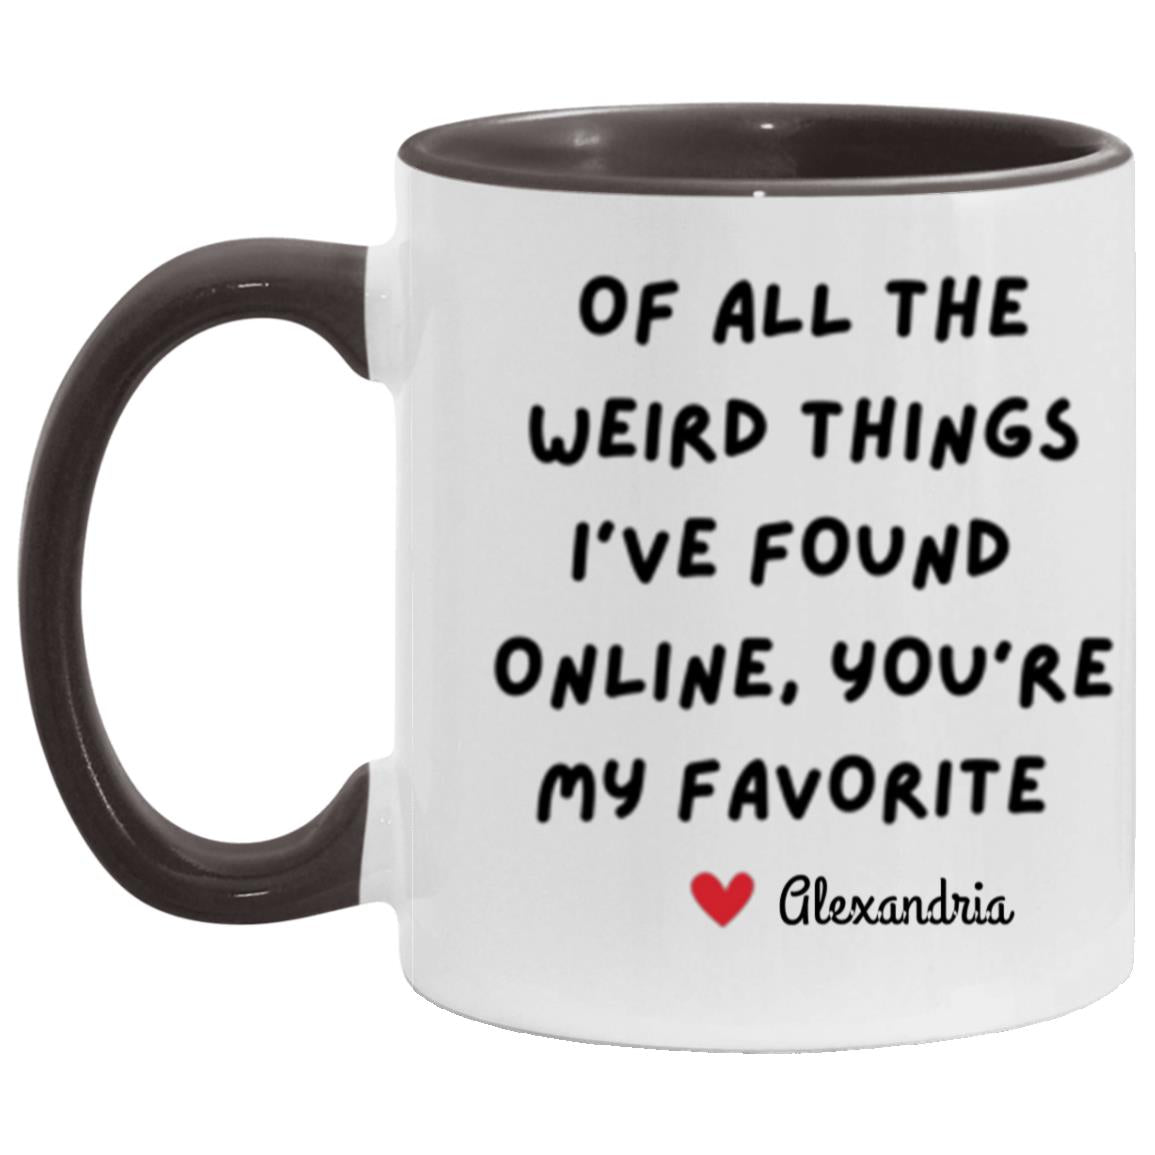 Get trendy with of all the weird things I've found online 15 oz "Of all the Weird Things I've Found online, You're my Favorite" Mug - Apparel available at Good Gift Company. Grab yours for $15.80 today!